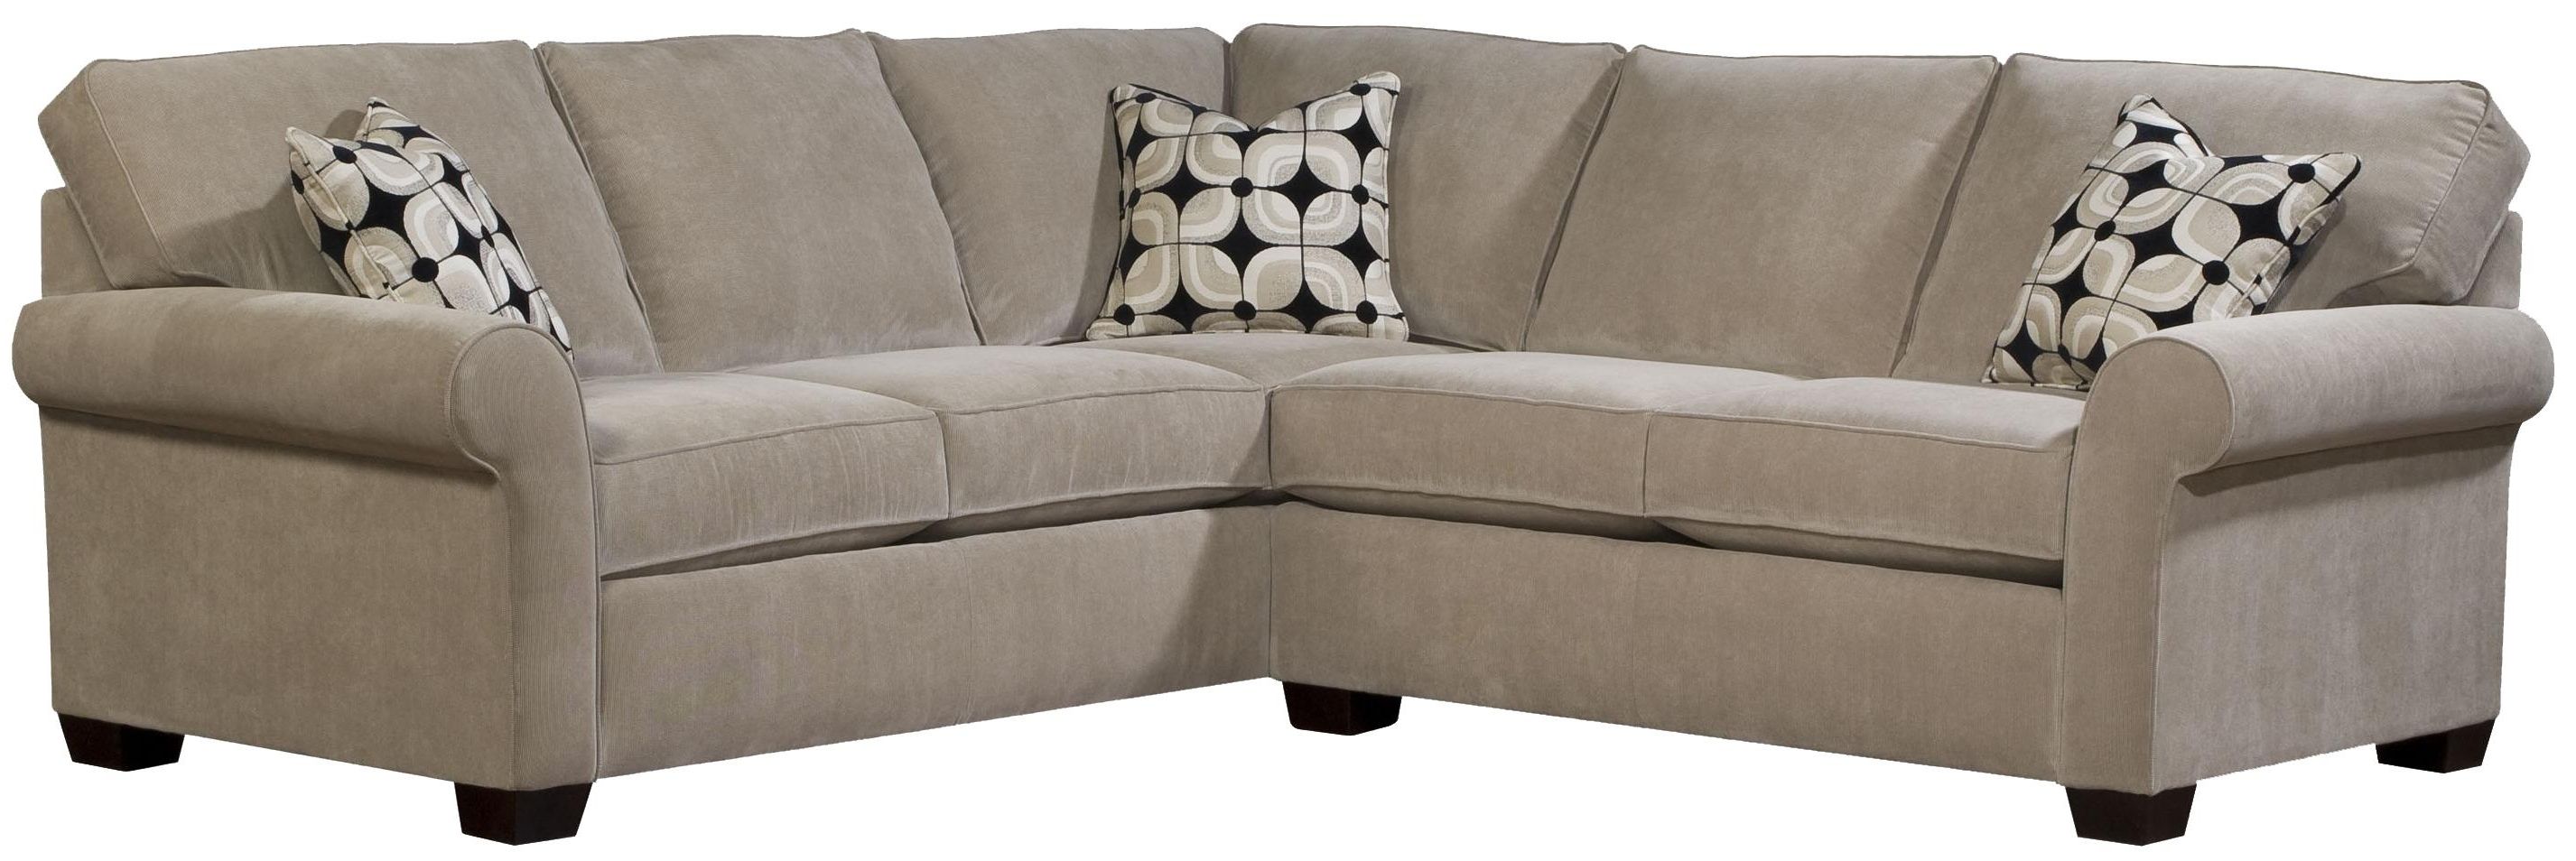 Featured Photo of 15 The Best Sam Levitz Sectional Sofas